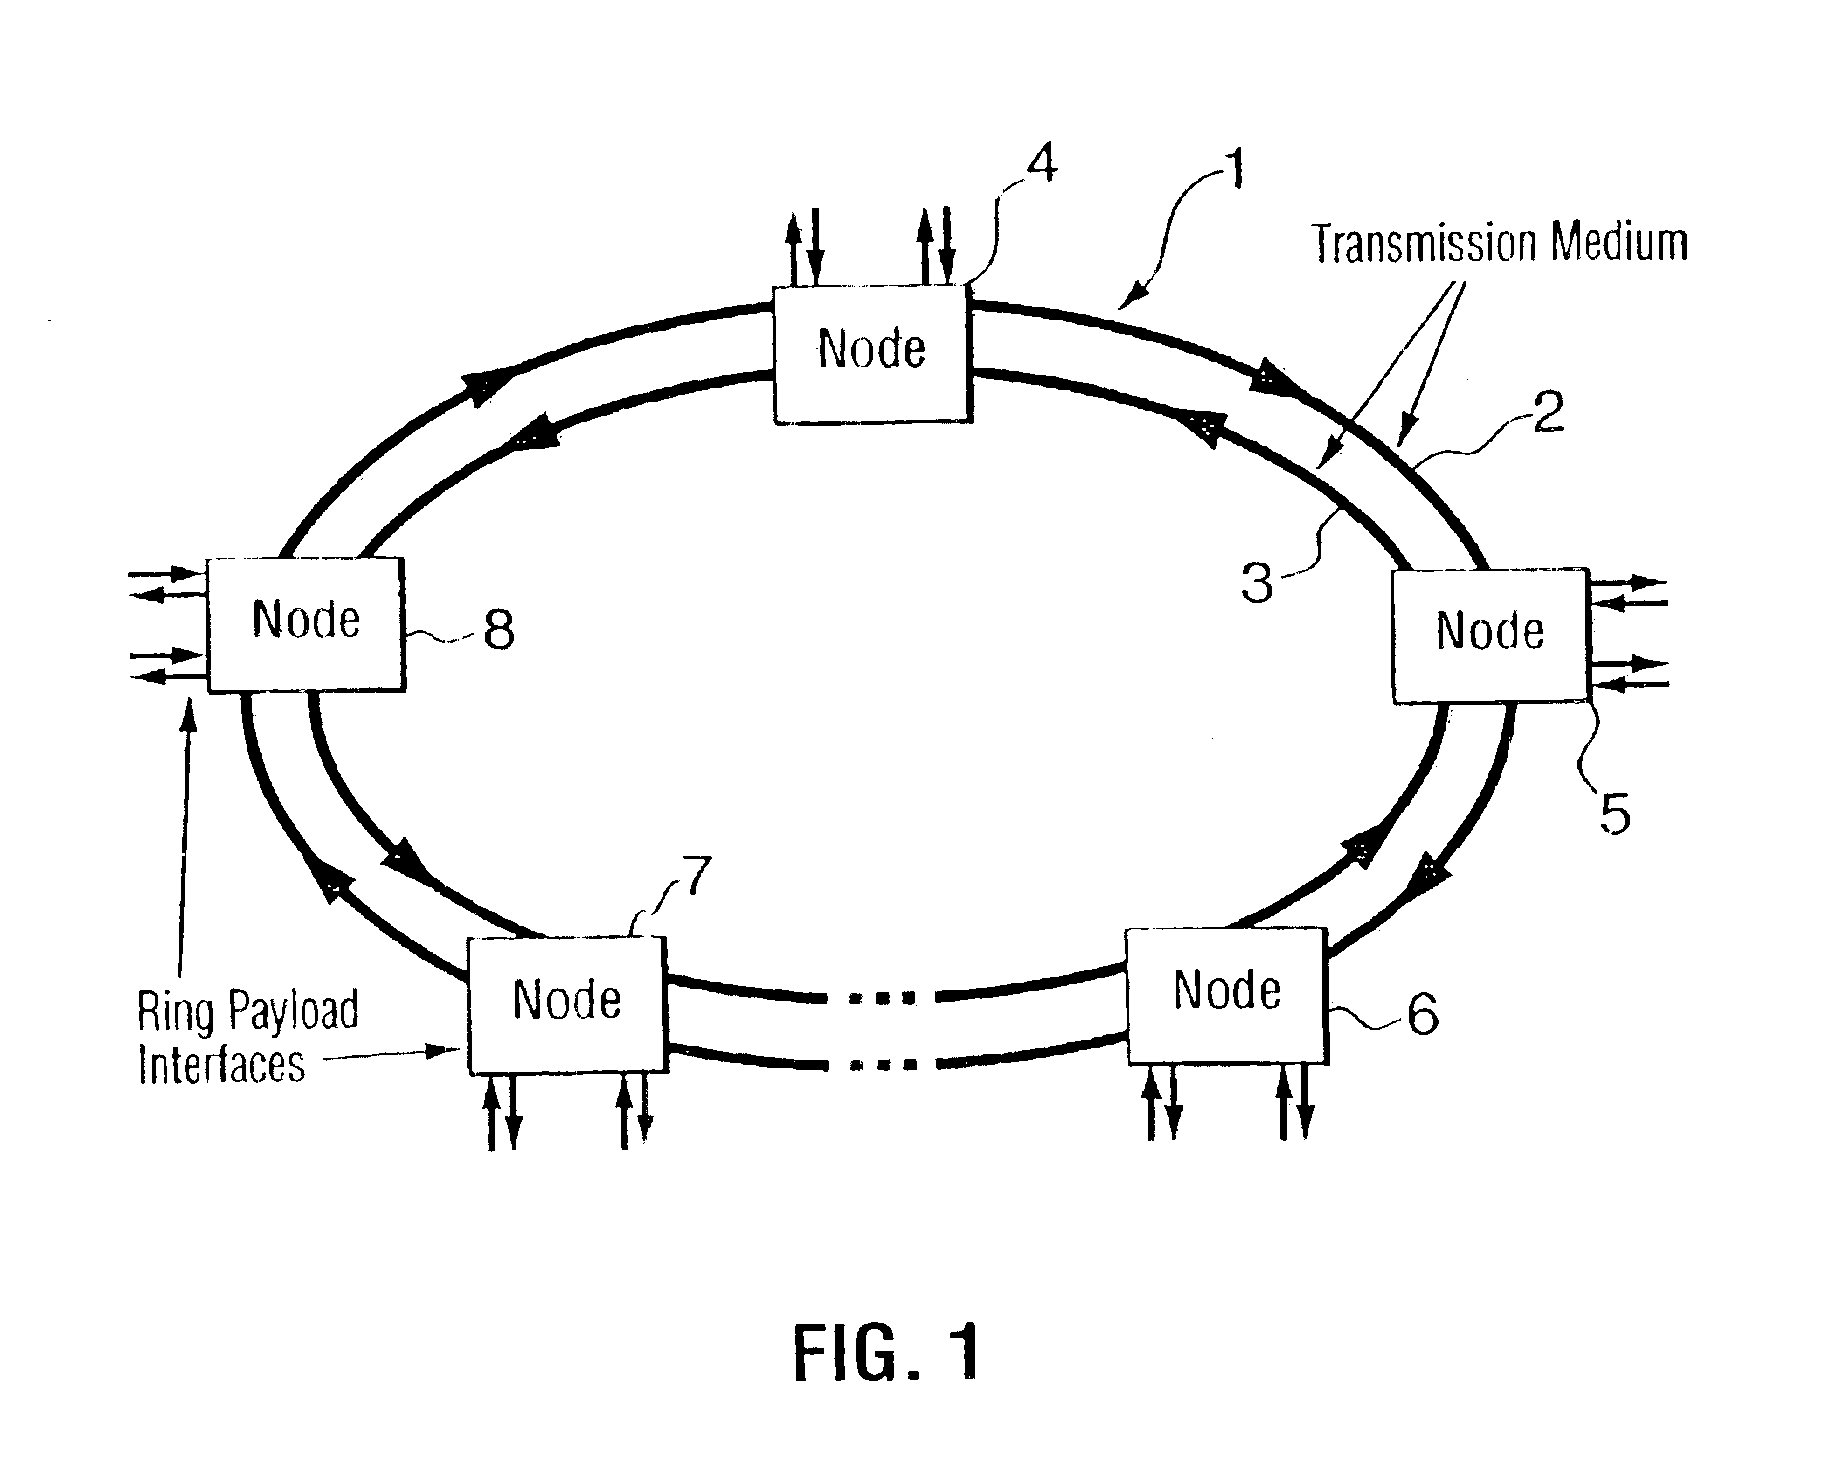 WDM optical network with passive pass-through at each node